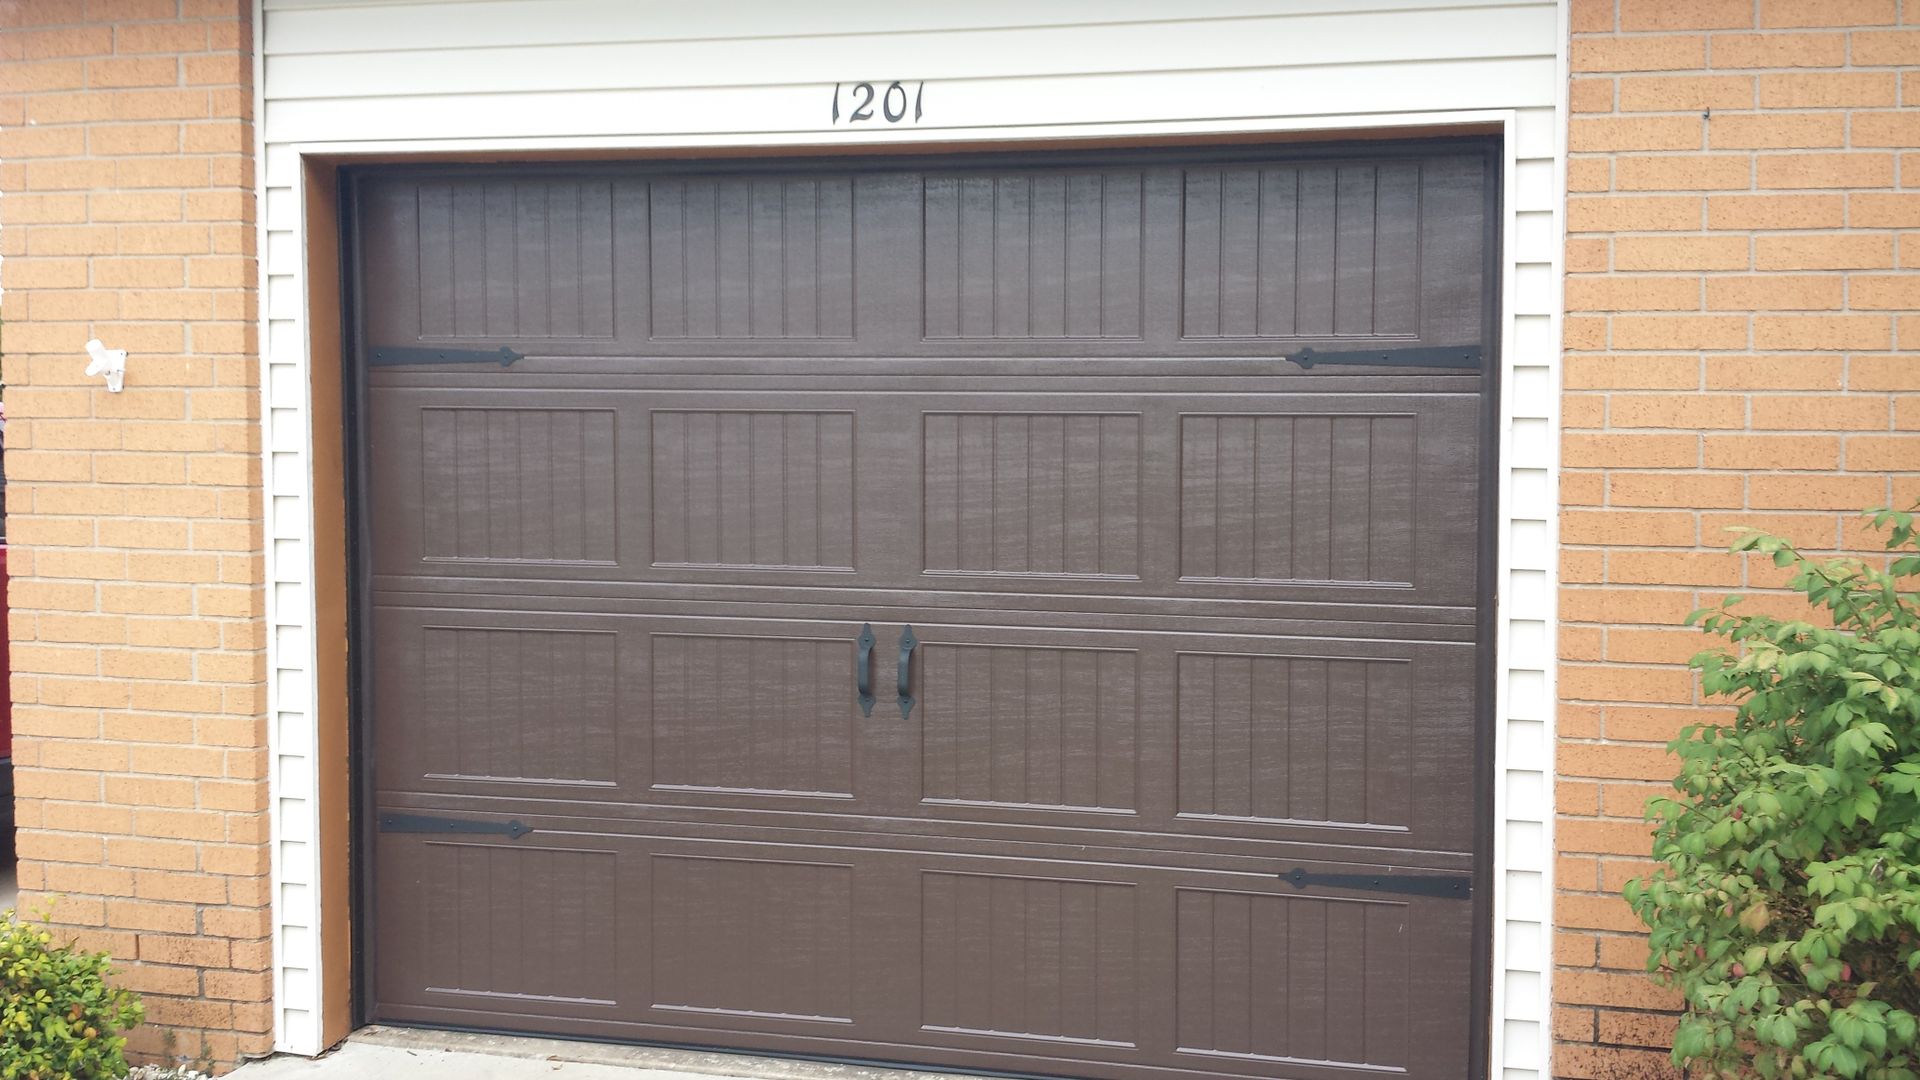 Automated garage doors at a storage facility